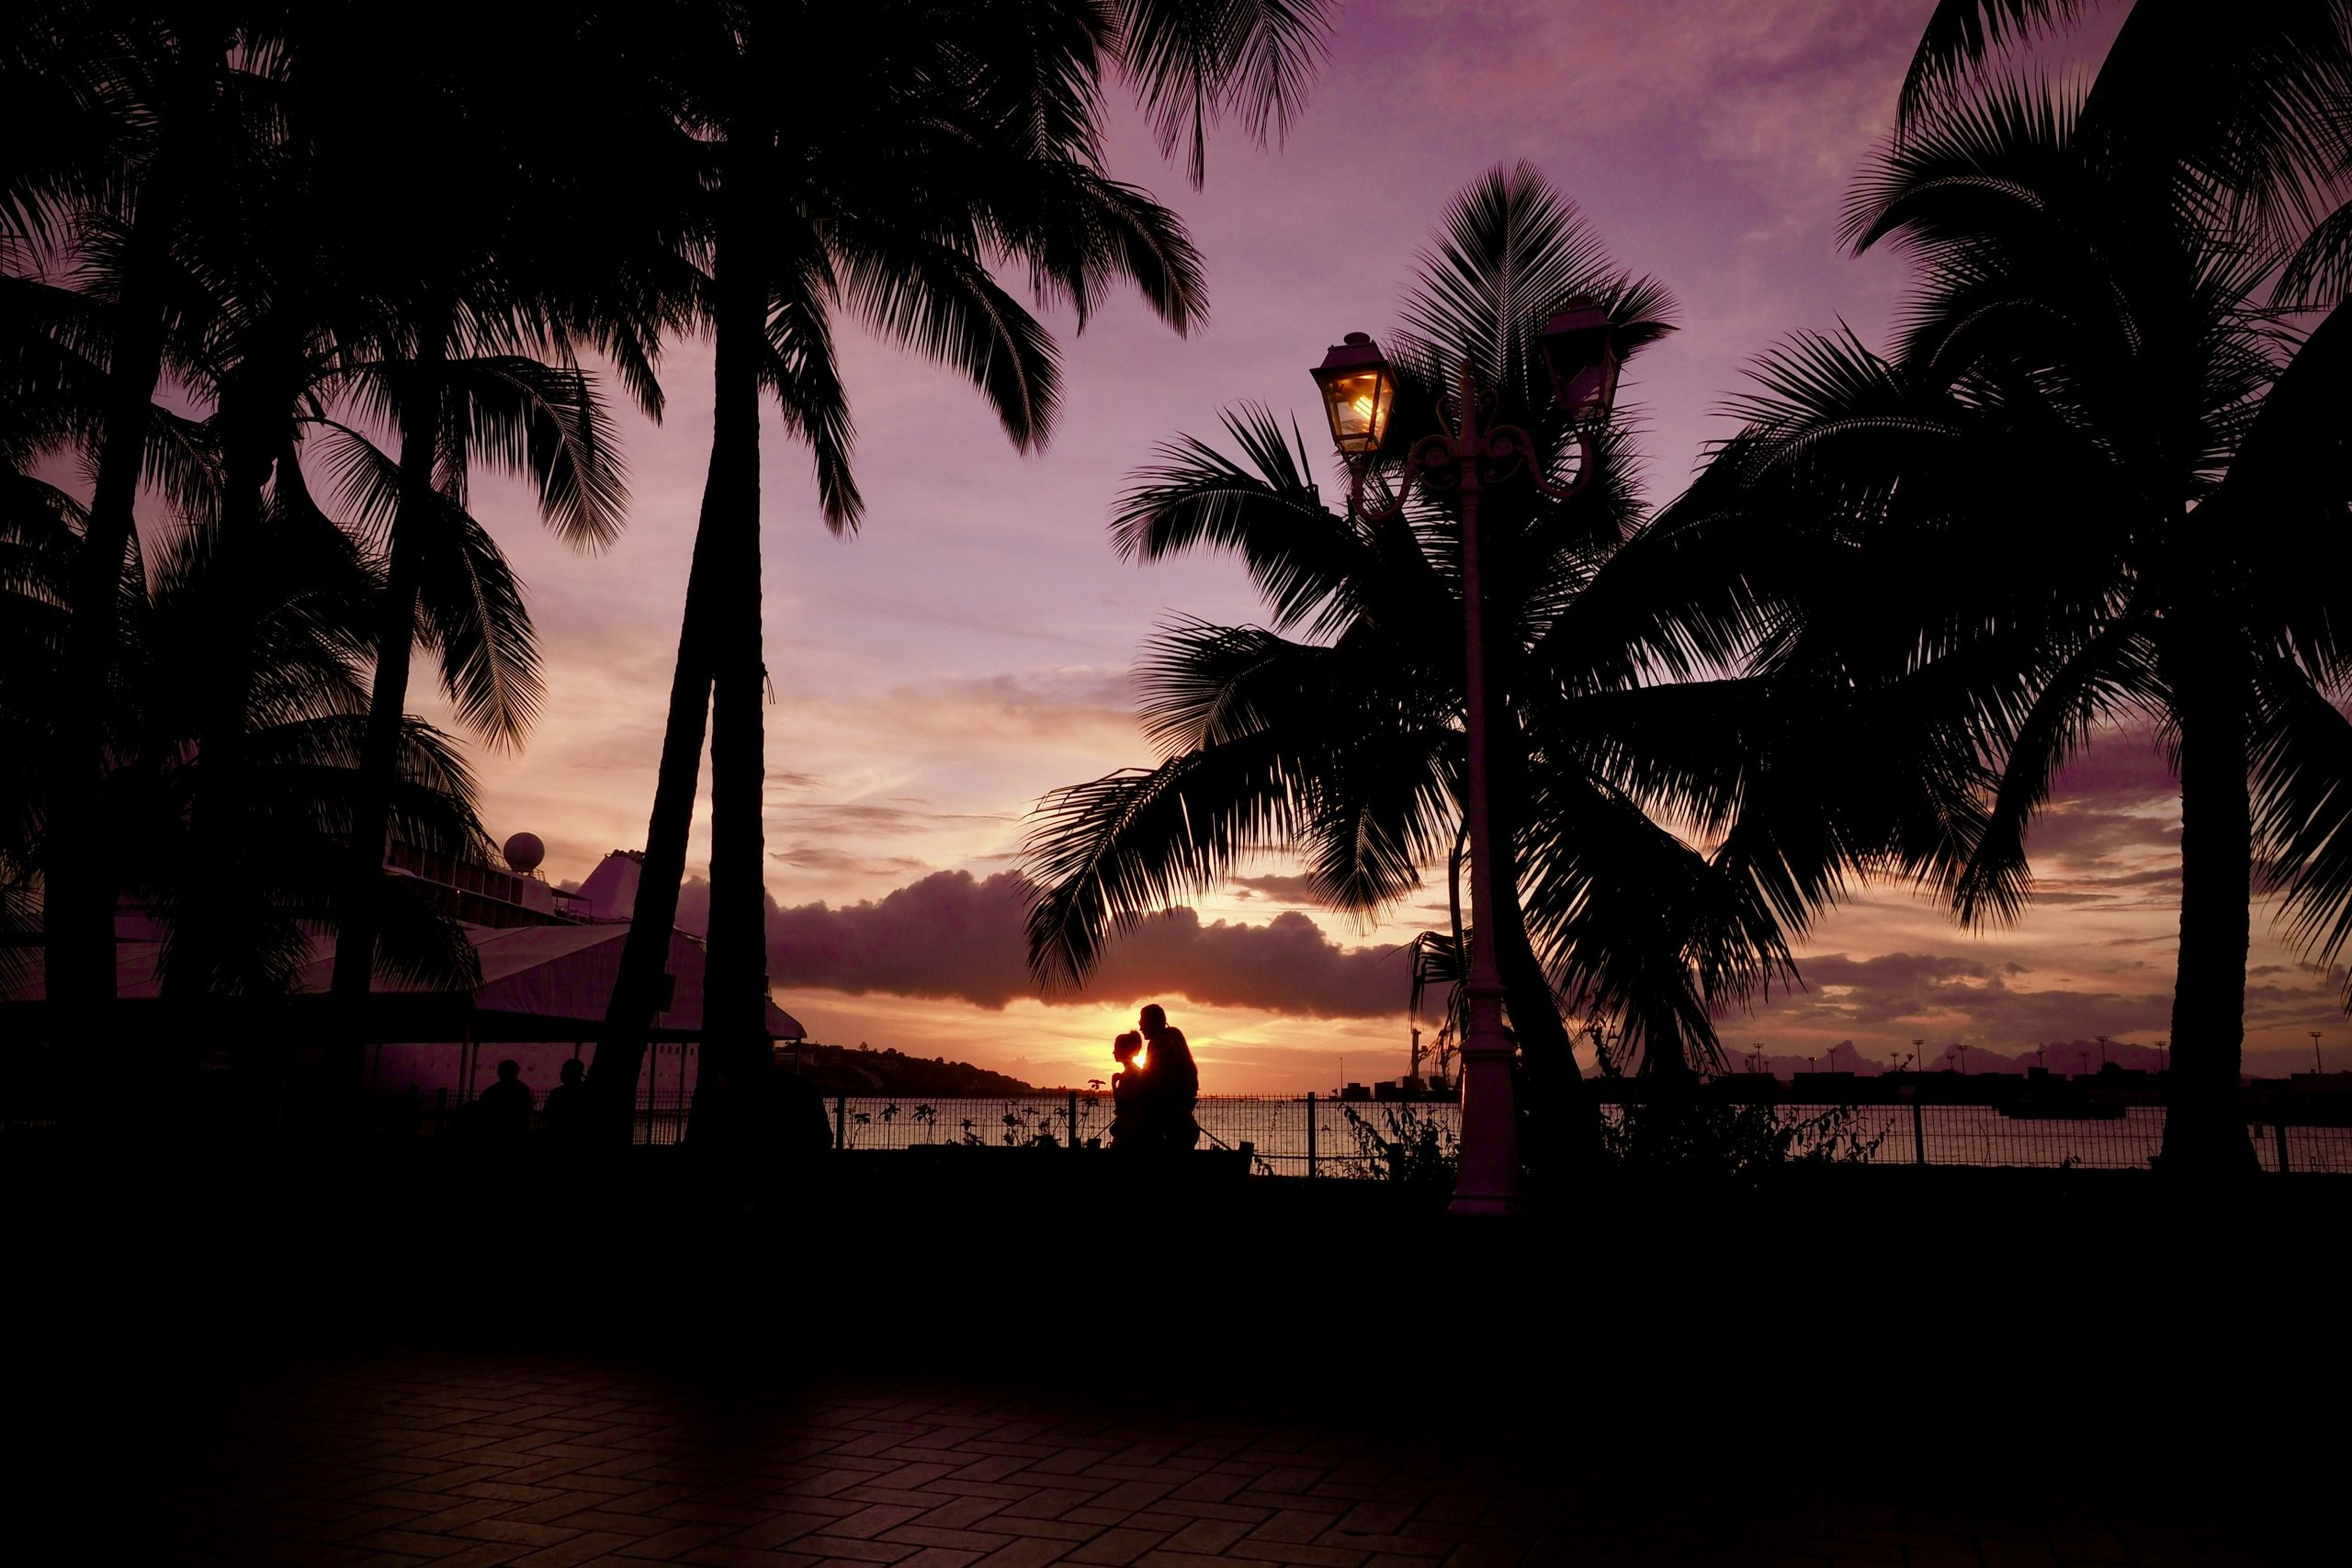 discover the allure of tahiti with our unforgettable escapades. find your paradise in the heart of french polynesia.